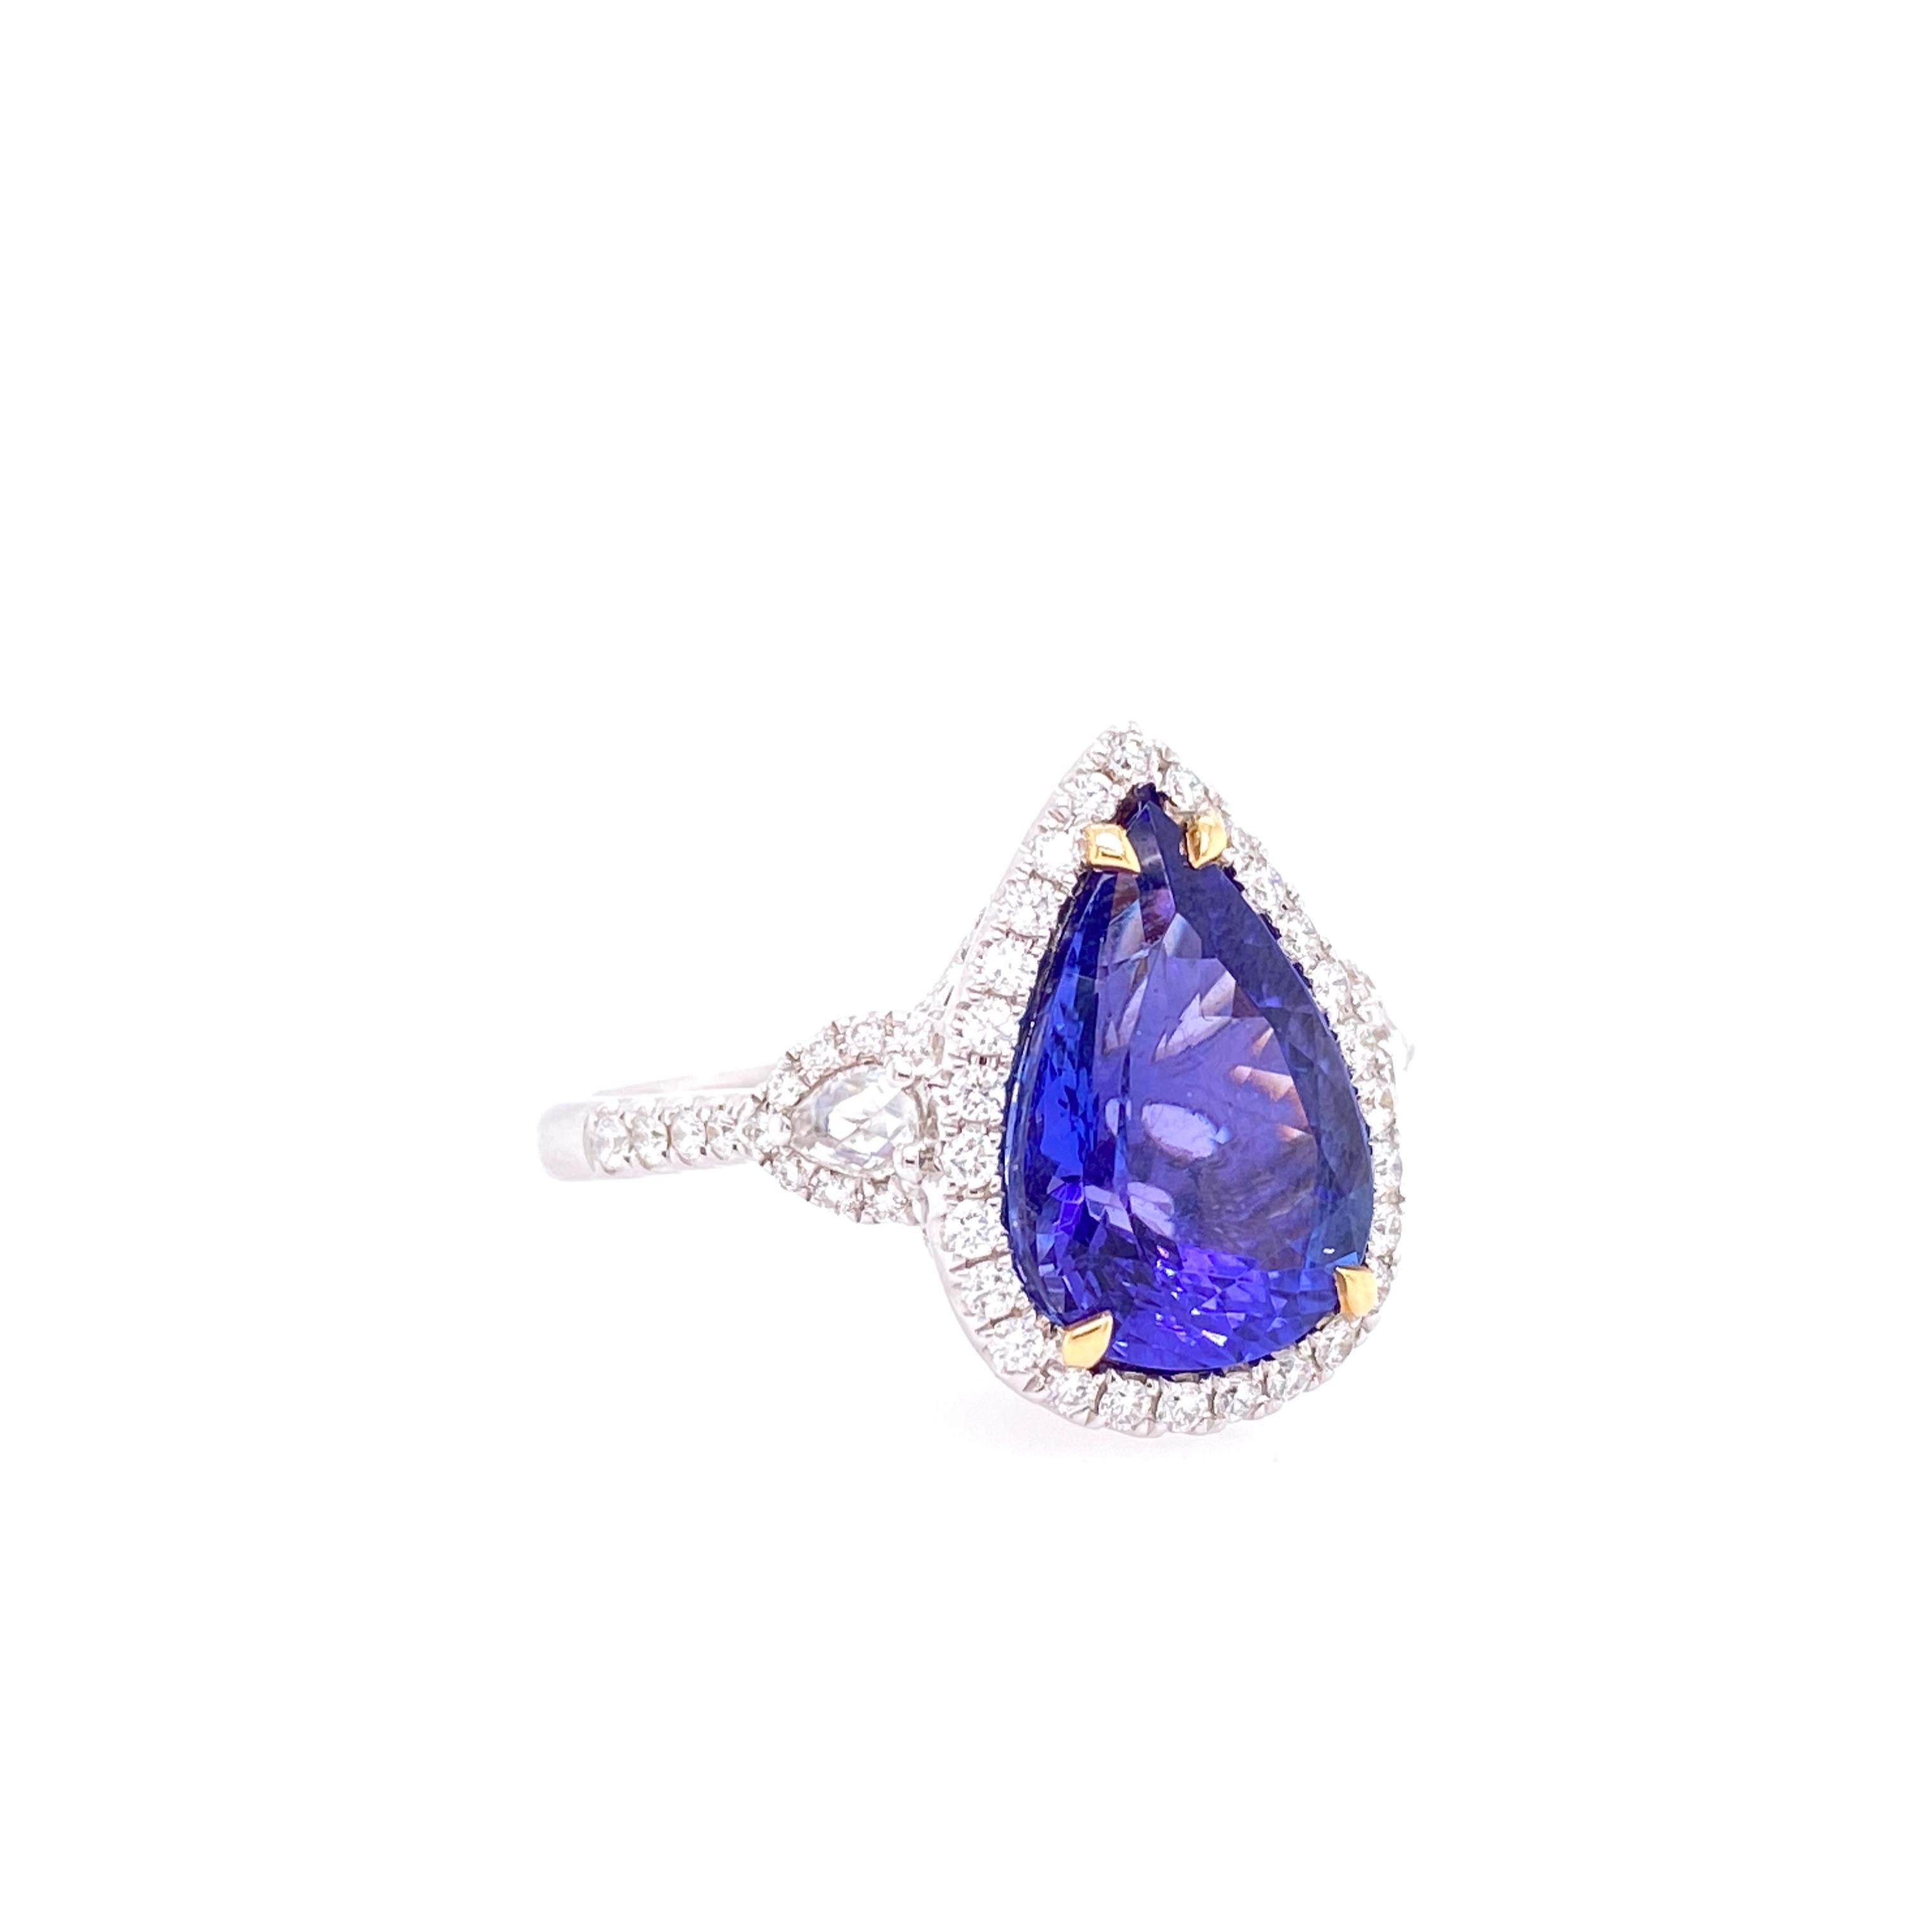 5.94 Carat Pear Shape Tanzanite and Diamond Ring In New Condition For Sale In Great Neck, NY